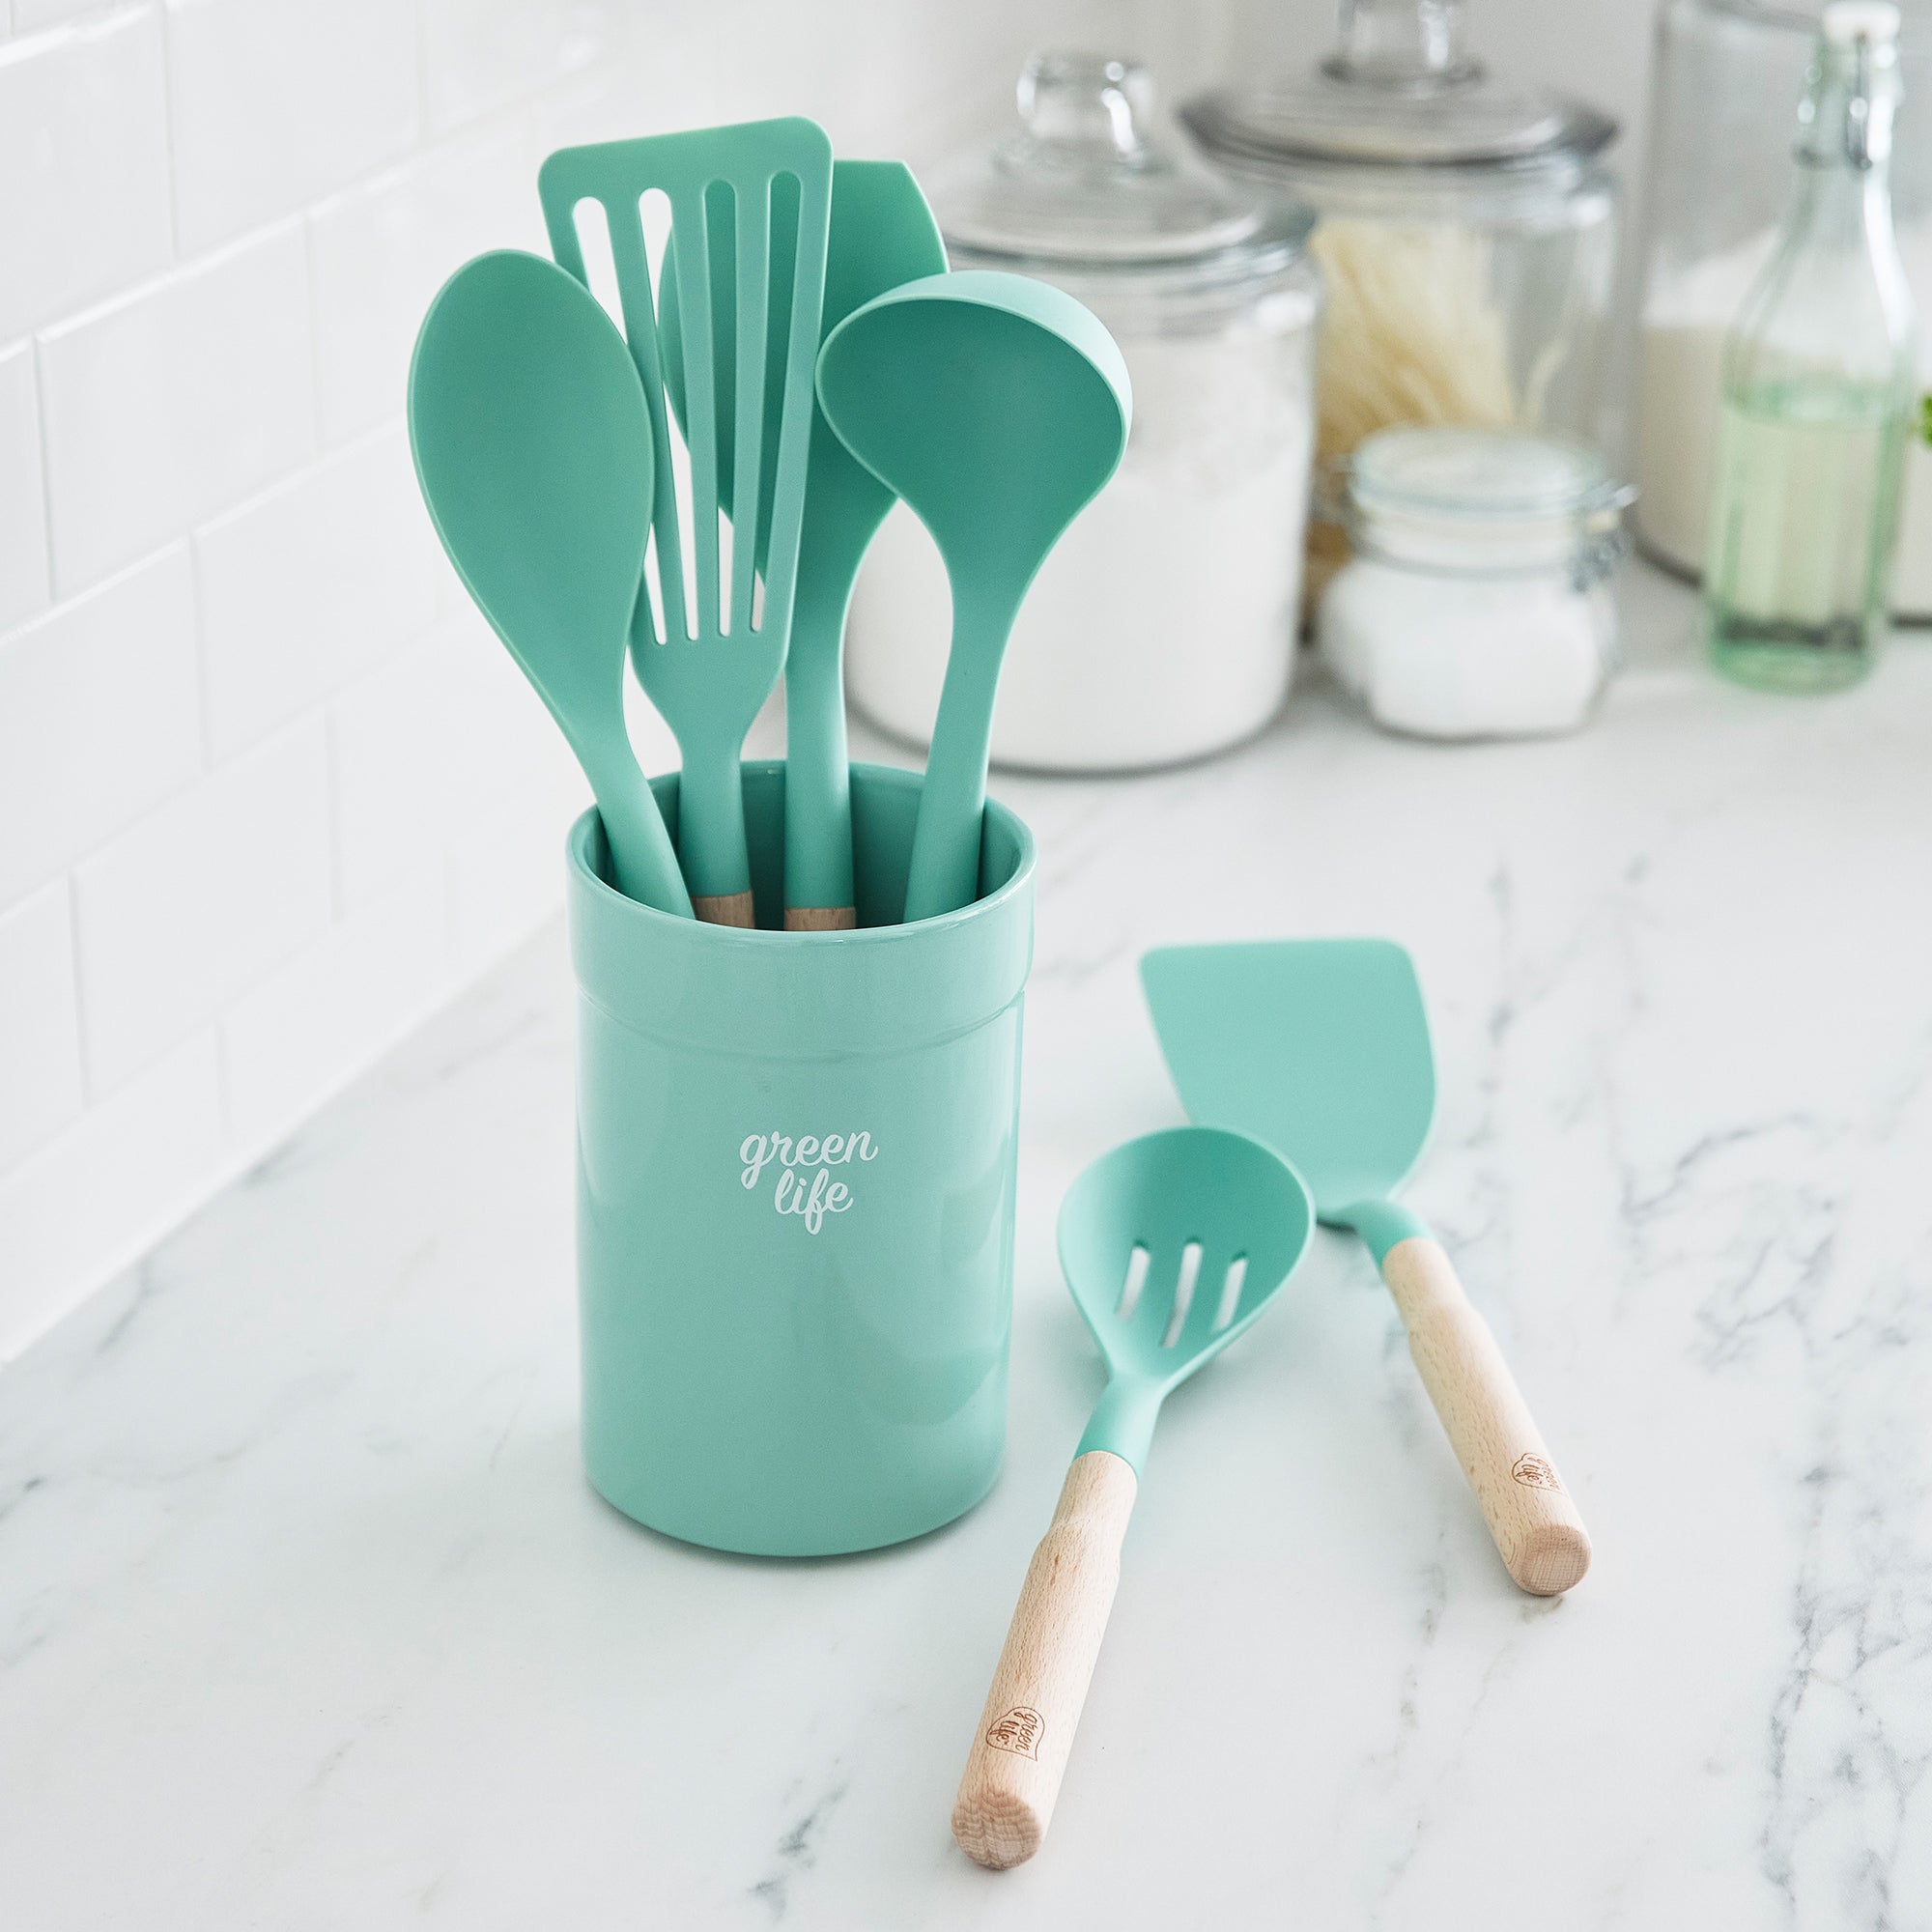 Kitchen Silicone Cooking Utensil 13-Piece Set with Stand, Wood